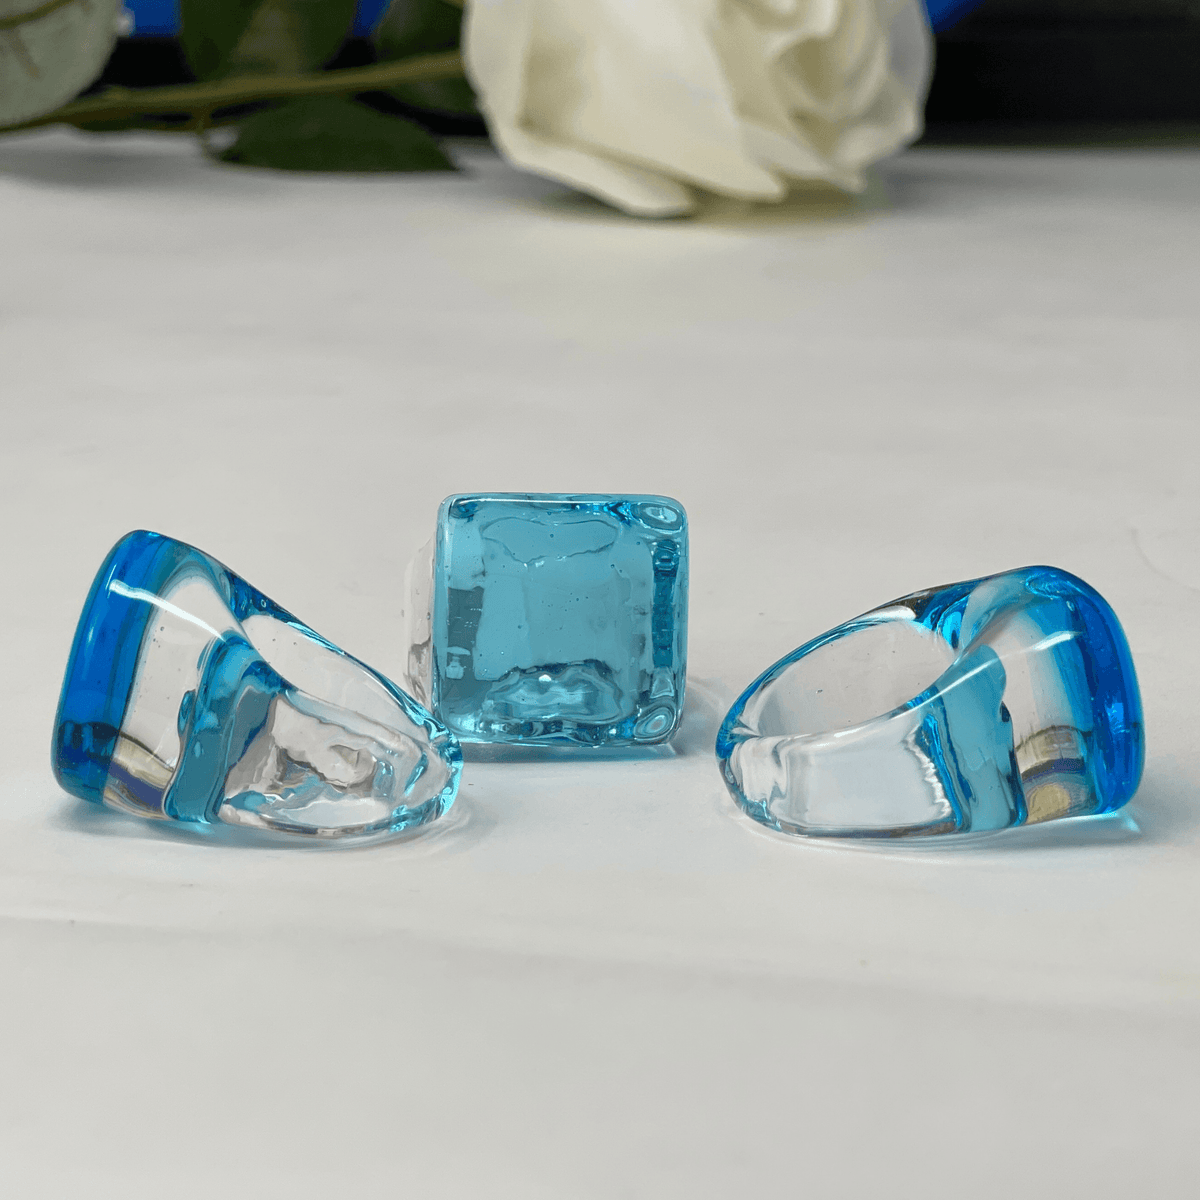 Murano Glass Statement Rings, Sky Blue Glass, Oval, Square or Round at MyItalianDecor